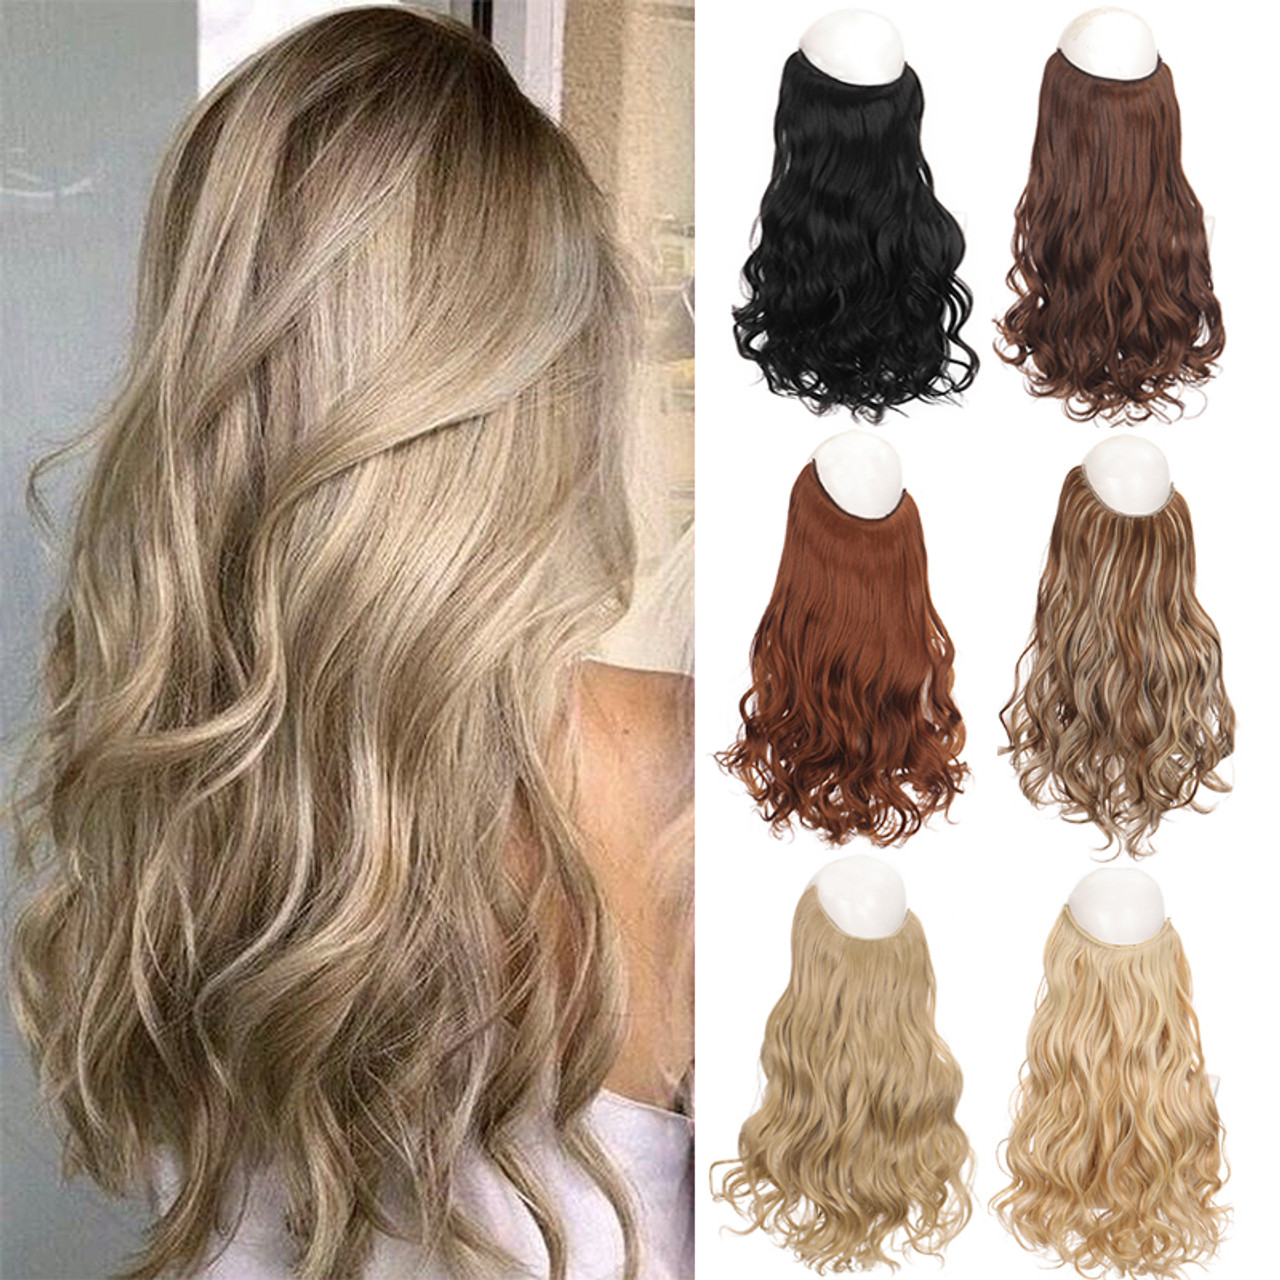 Real Hair, clip extensions, hair pieces